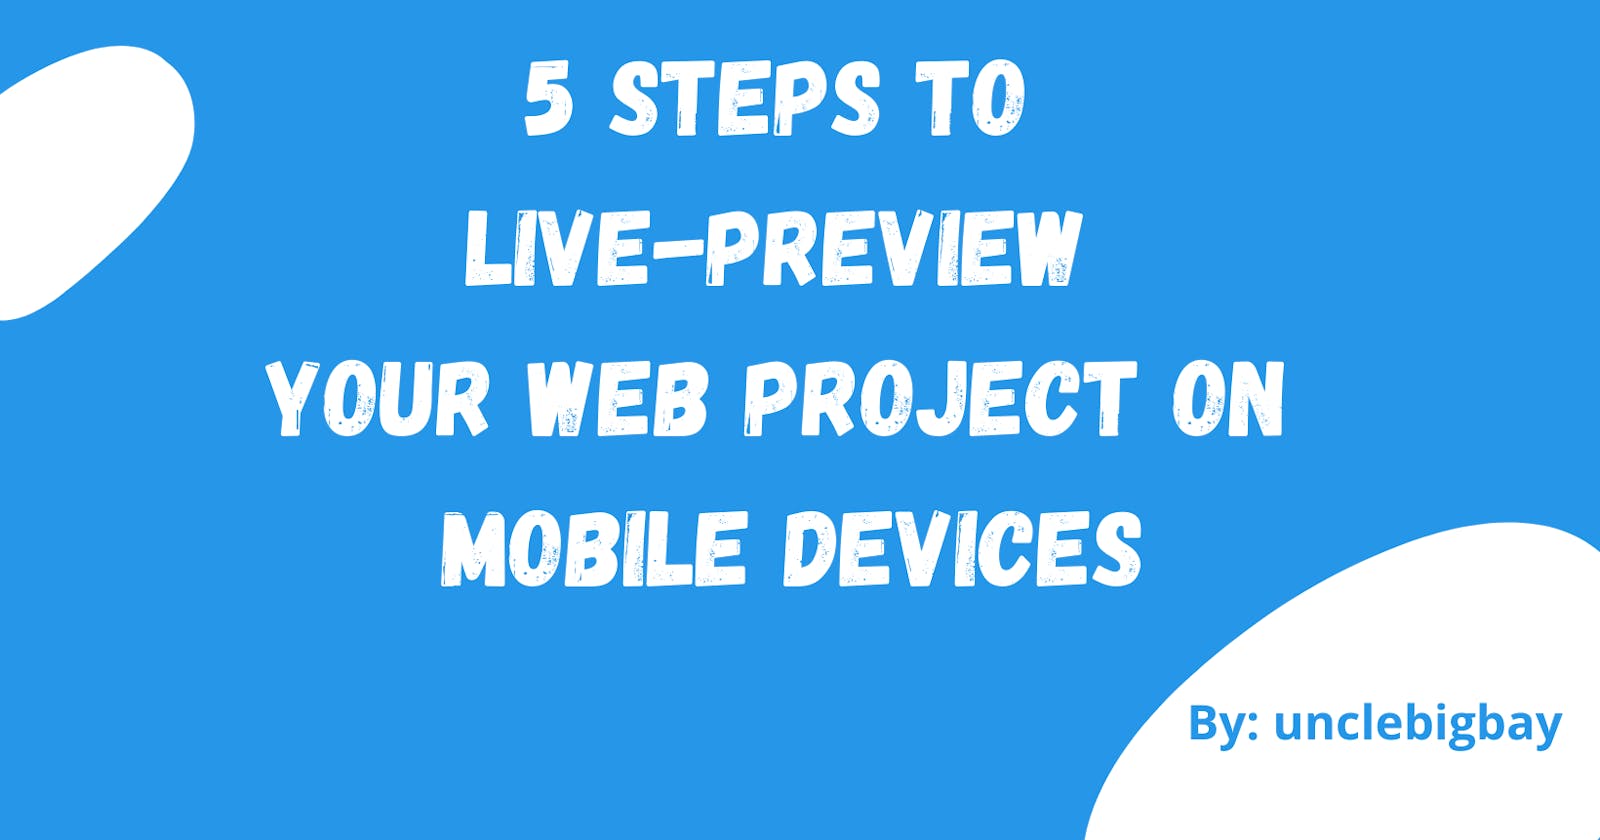 5 Steps to Live-Preview your Web Project on Mobile Devices